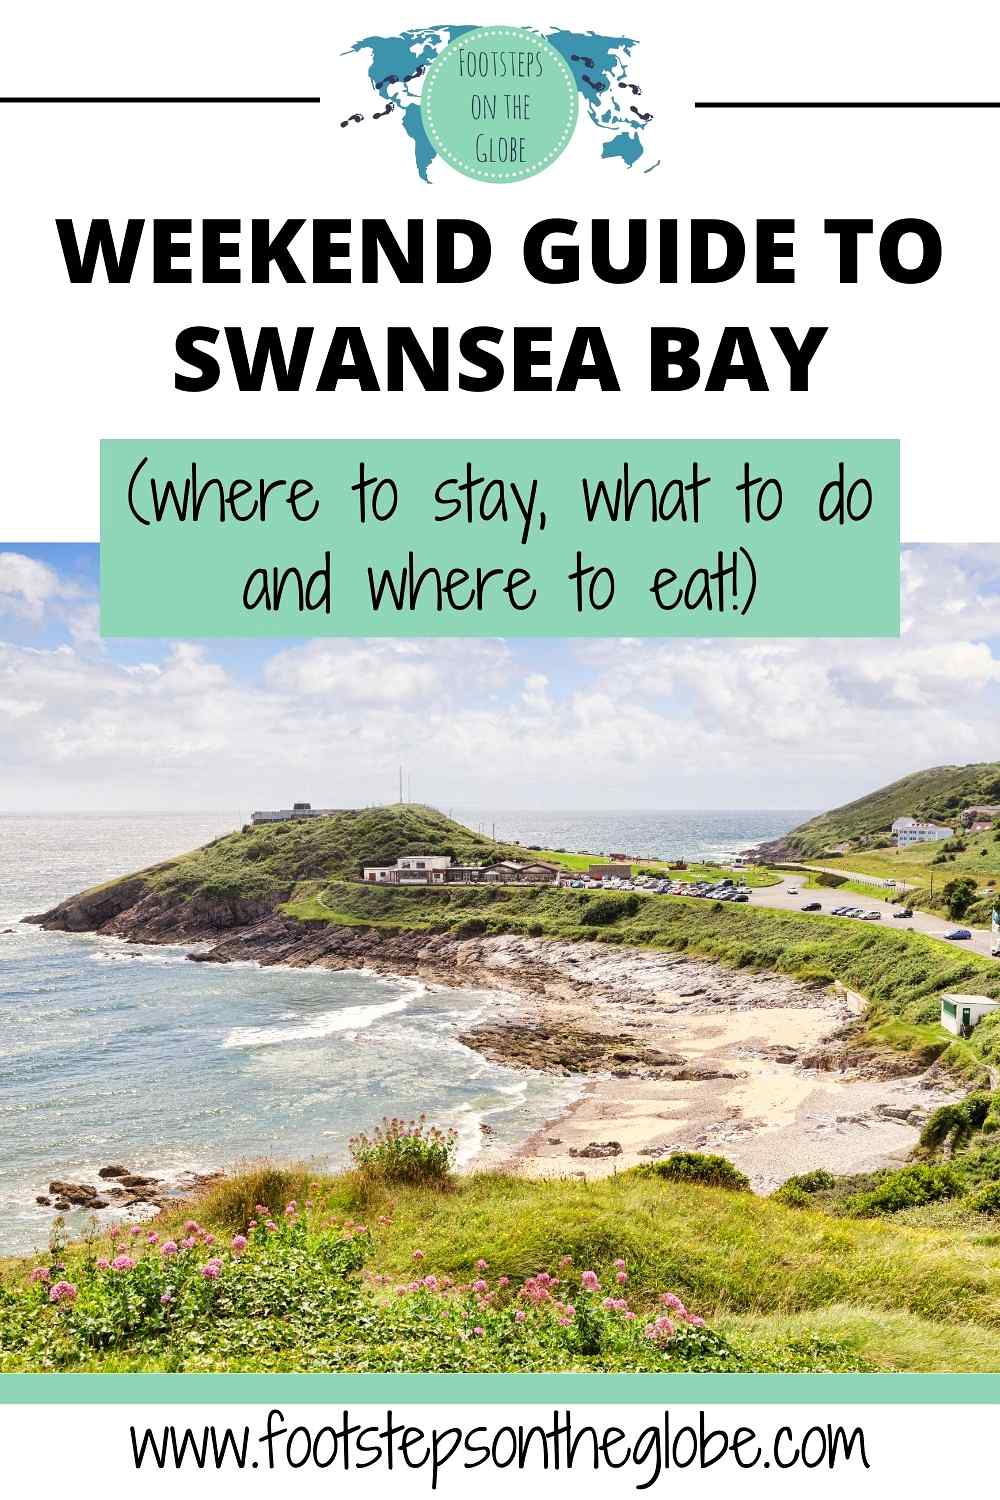 Pinterest image of a view of a beach at Swansea Bay in Wales with the text: "Weekend Guide to Swansea Bay (where to stay, what to do and where to eat!)"